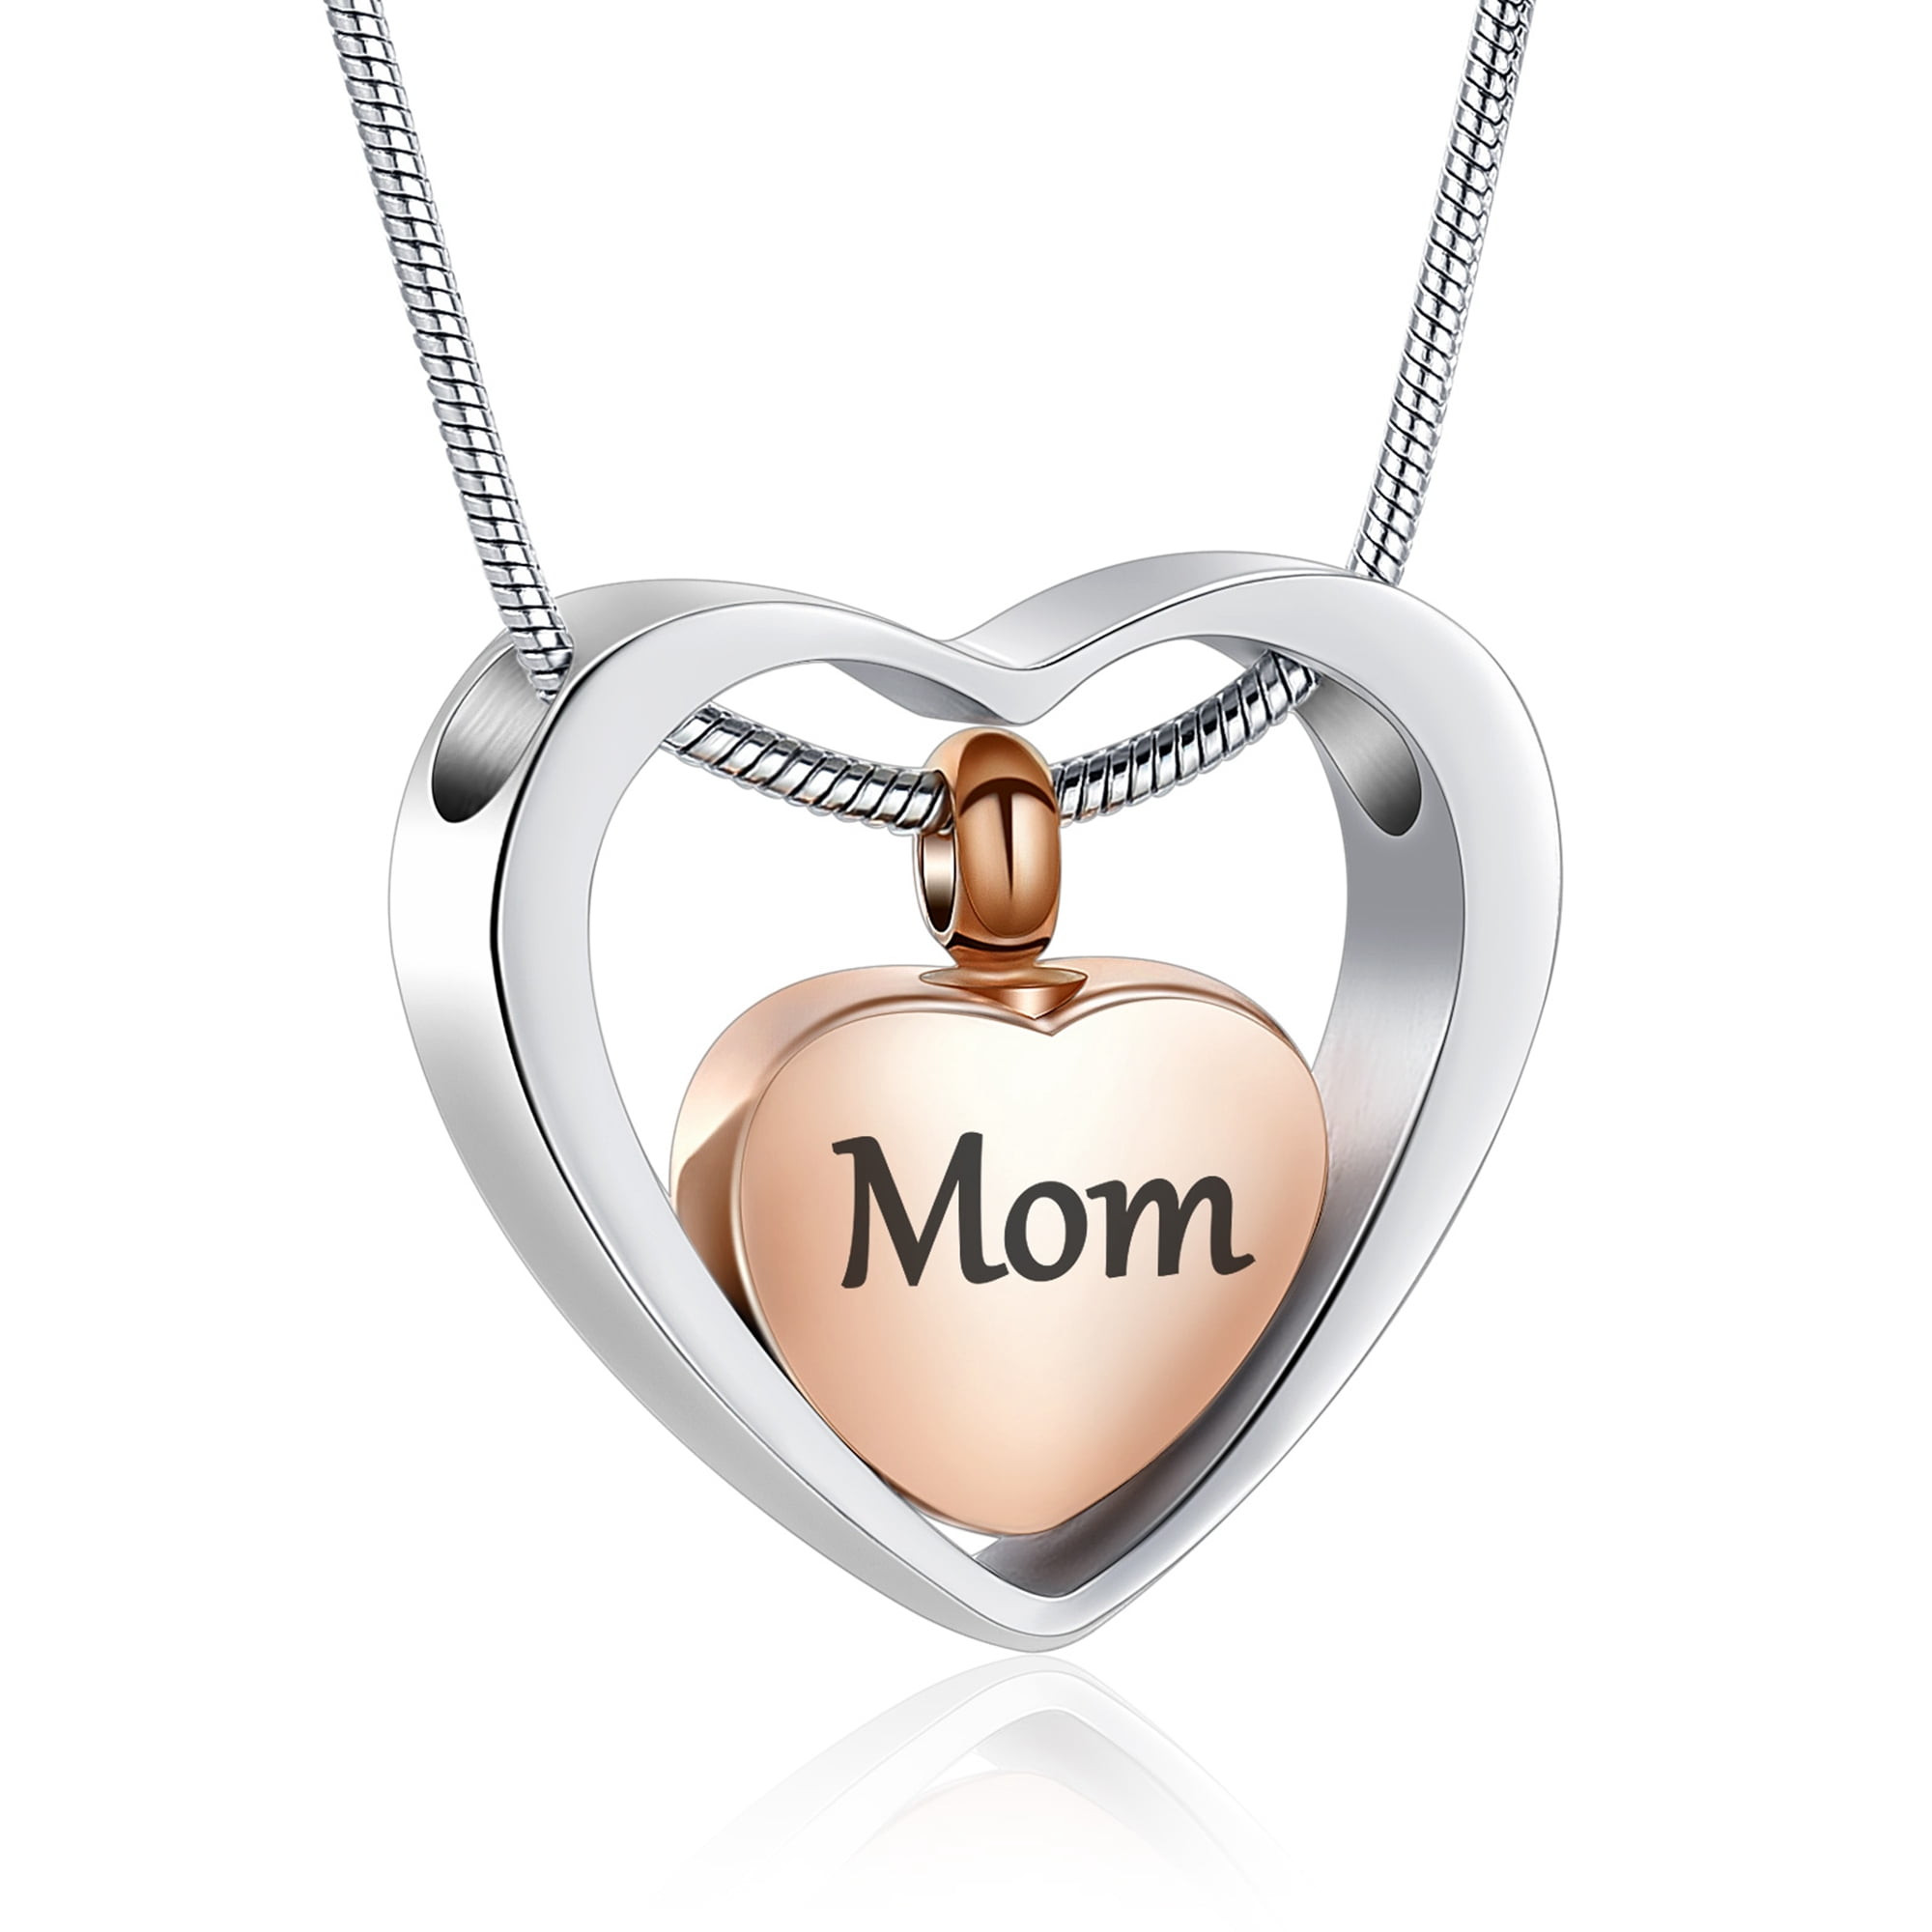 Heart in Heart Urn Necklace Cremation Urn Pendant Memorial Ash Necklace Jewelry Urn Necklaces for Ashes bd7eb75f 805a 4acc be9d 0de20a81627c.d8cce66f12bb81f2c3da6e0c46781d0f